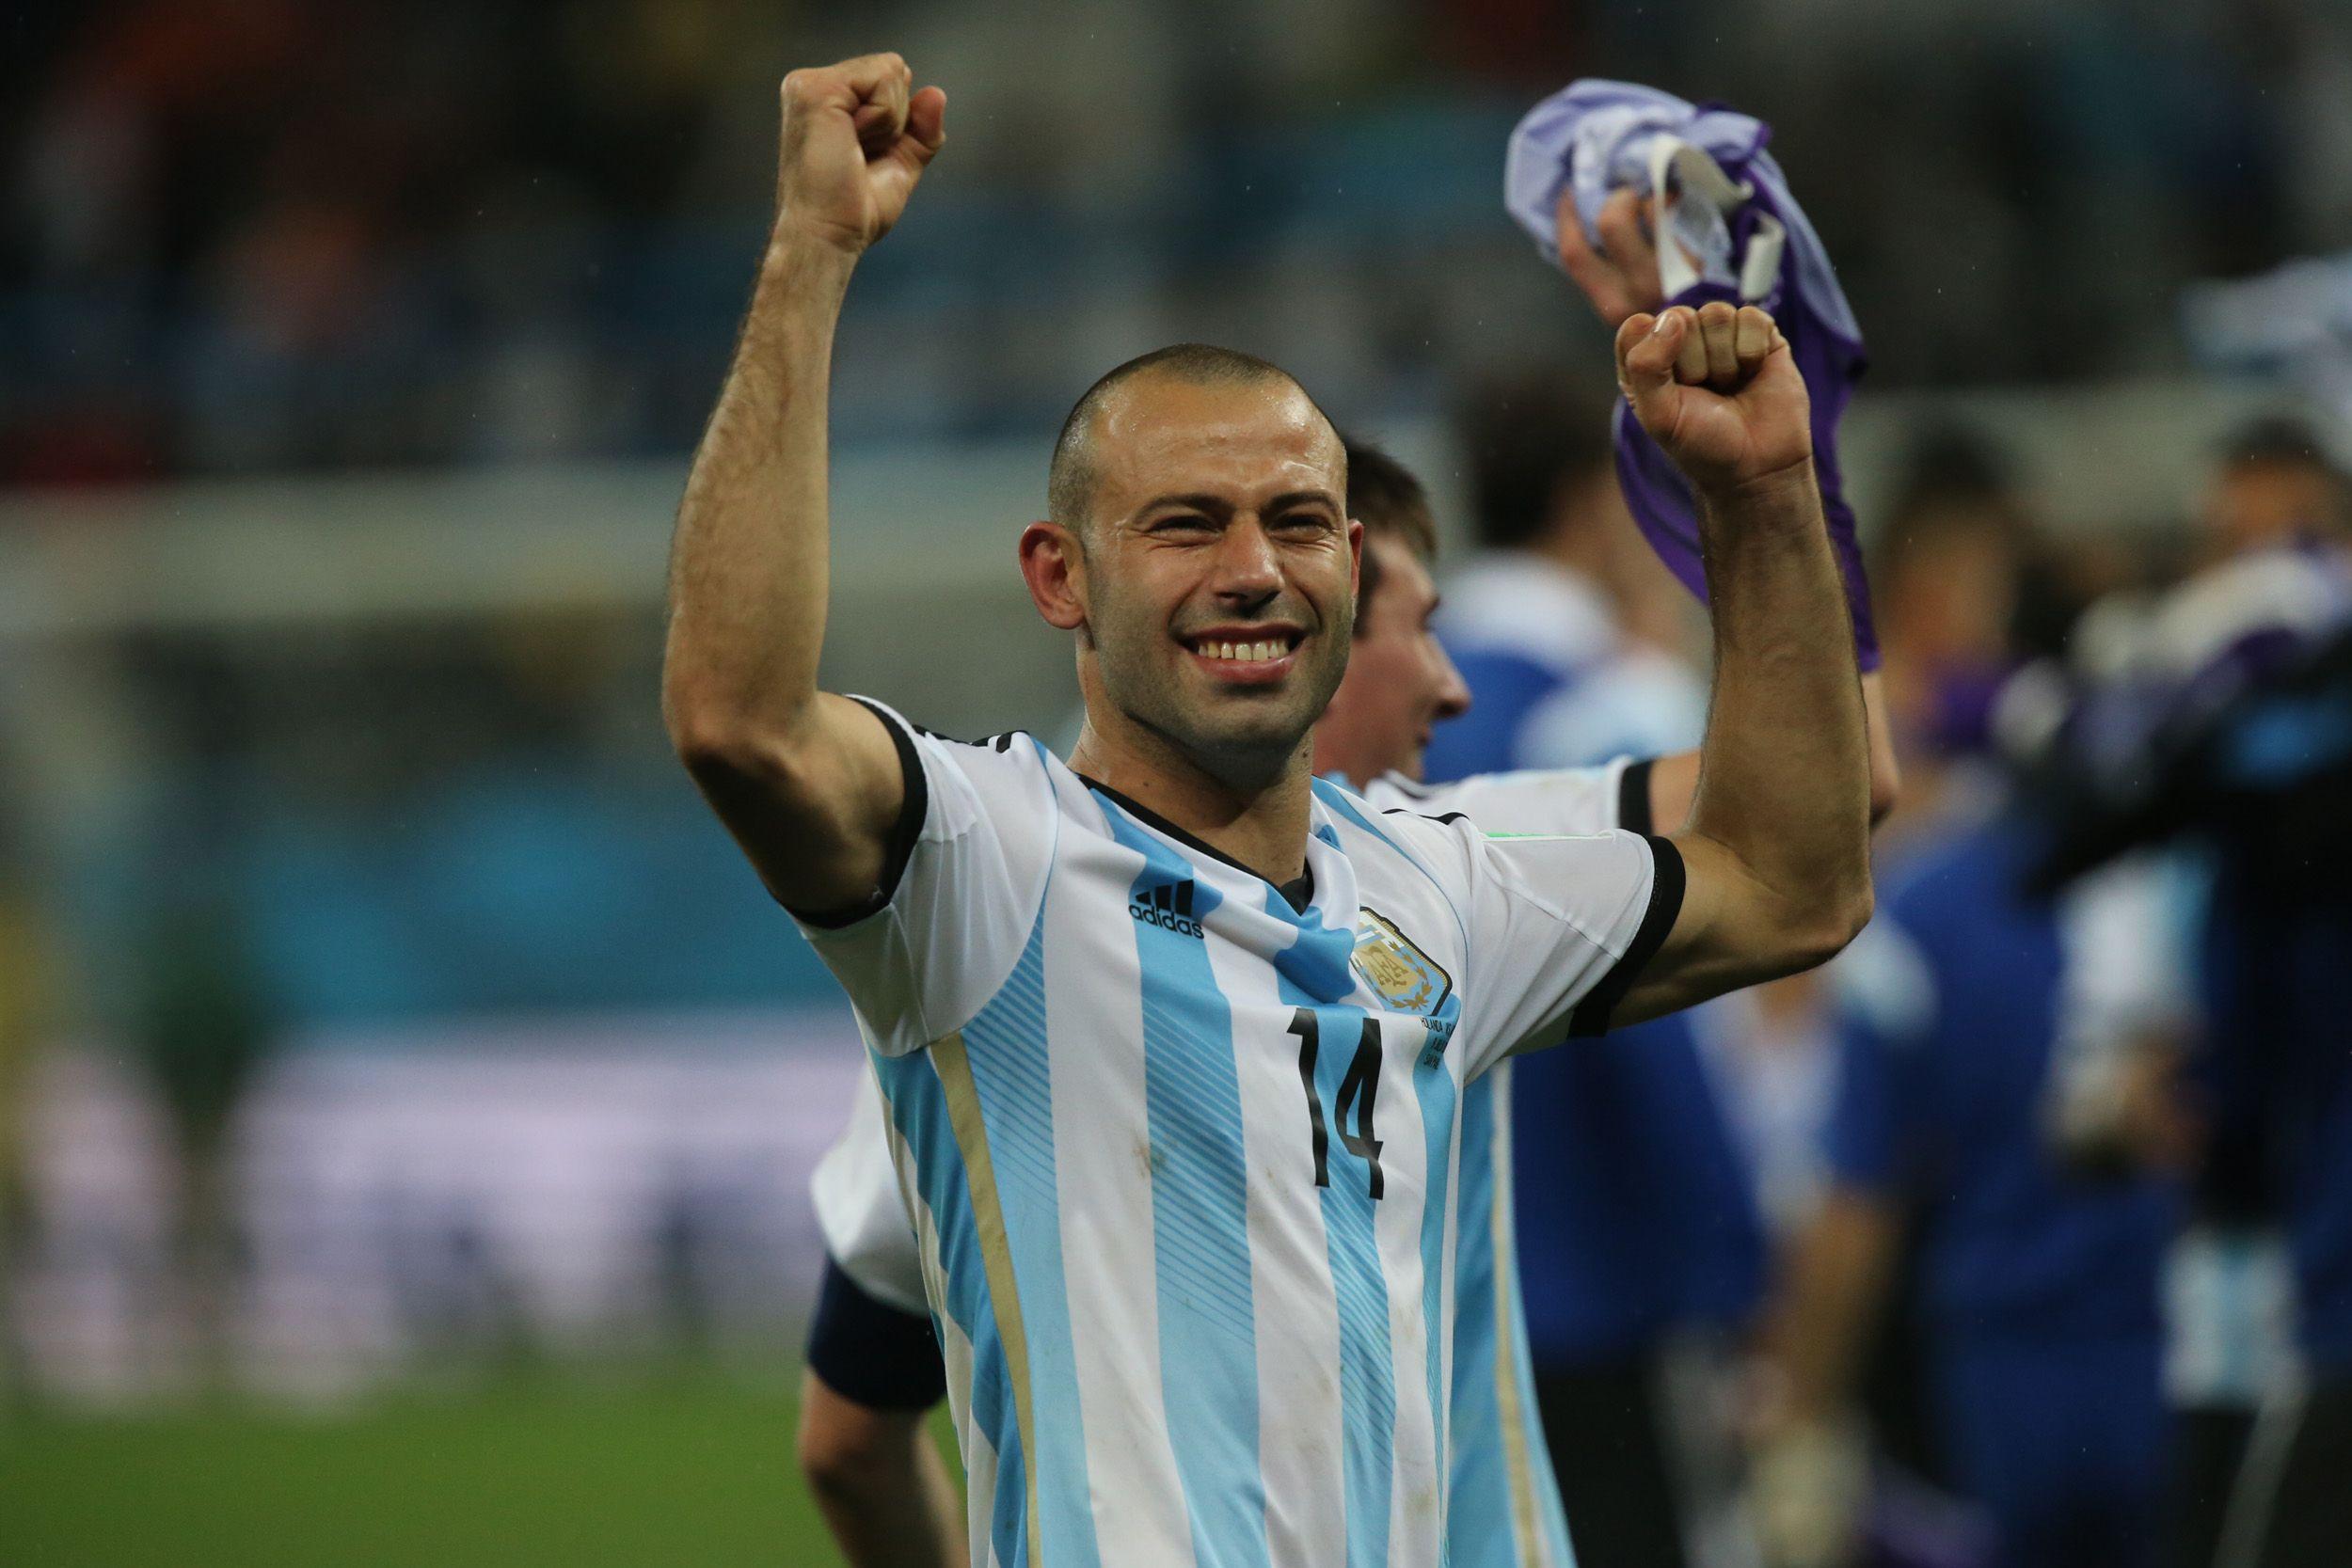 Mascherano considered retirement after the World Cup